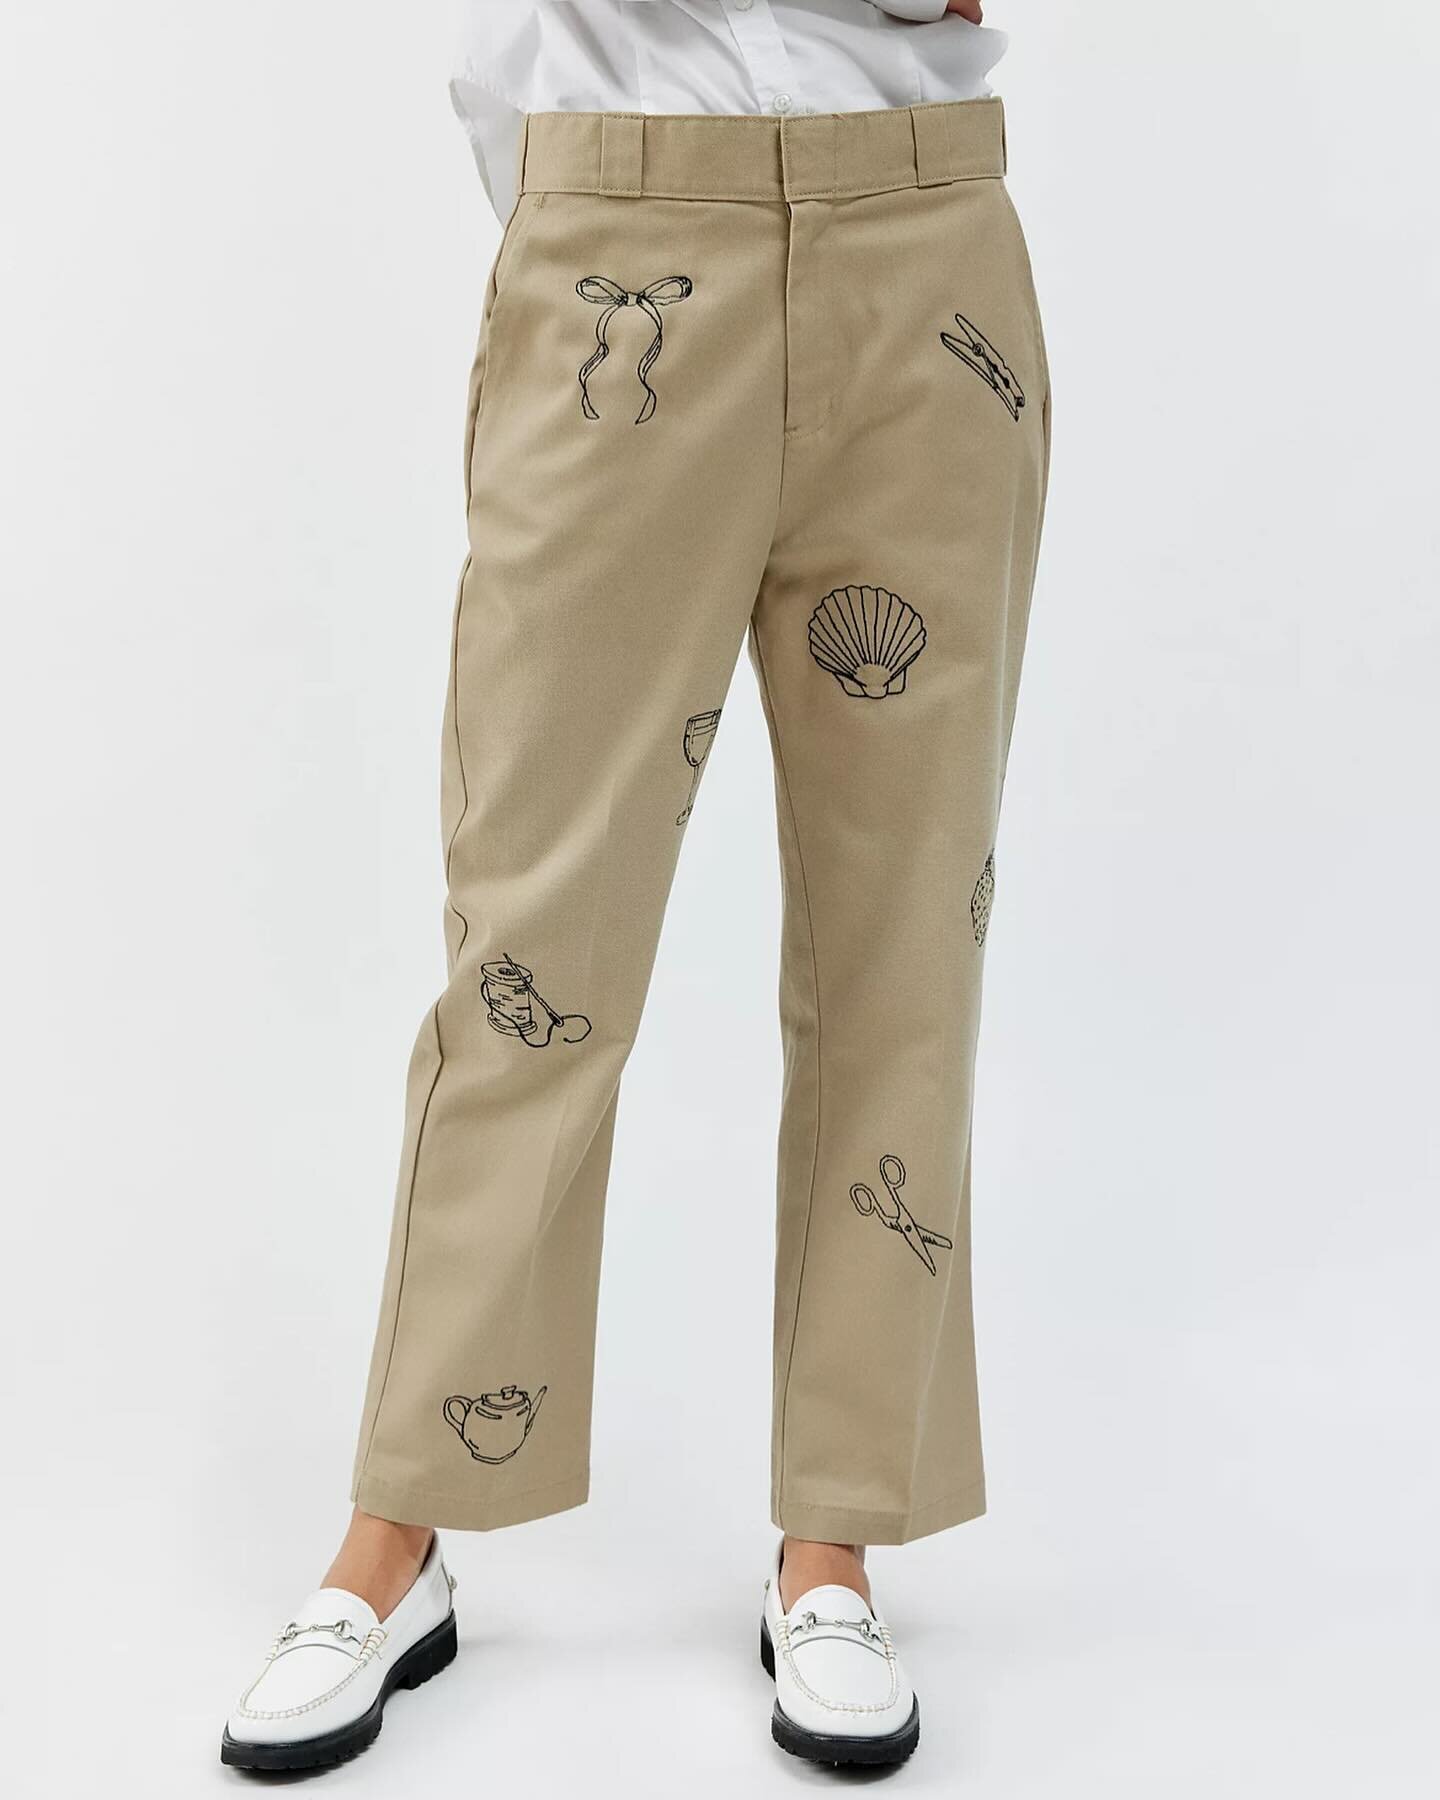 Pants we embroidered for @theseriesny. Check out their @urbanoutfitters x @dickies collection that reimagines the concept of workwear using ideas and images that are traditionally associated with &ldquo;women&rsquo;s work&rdquo;. Available now on Urb